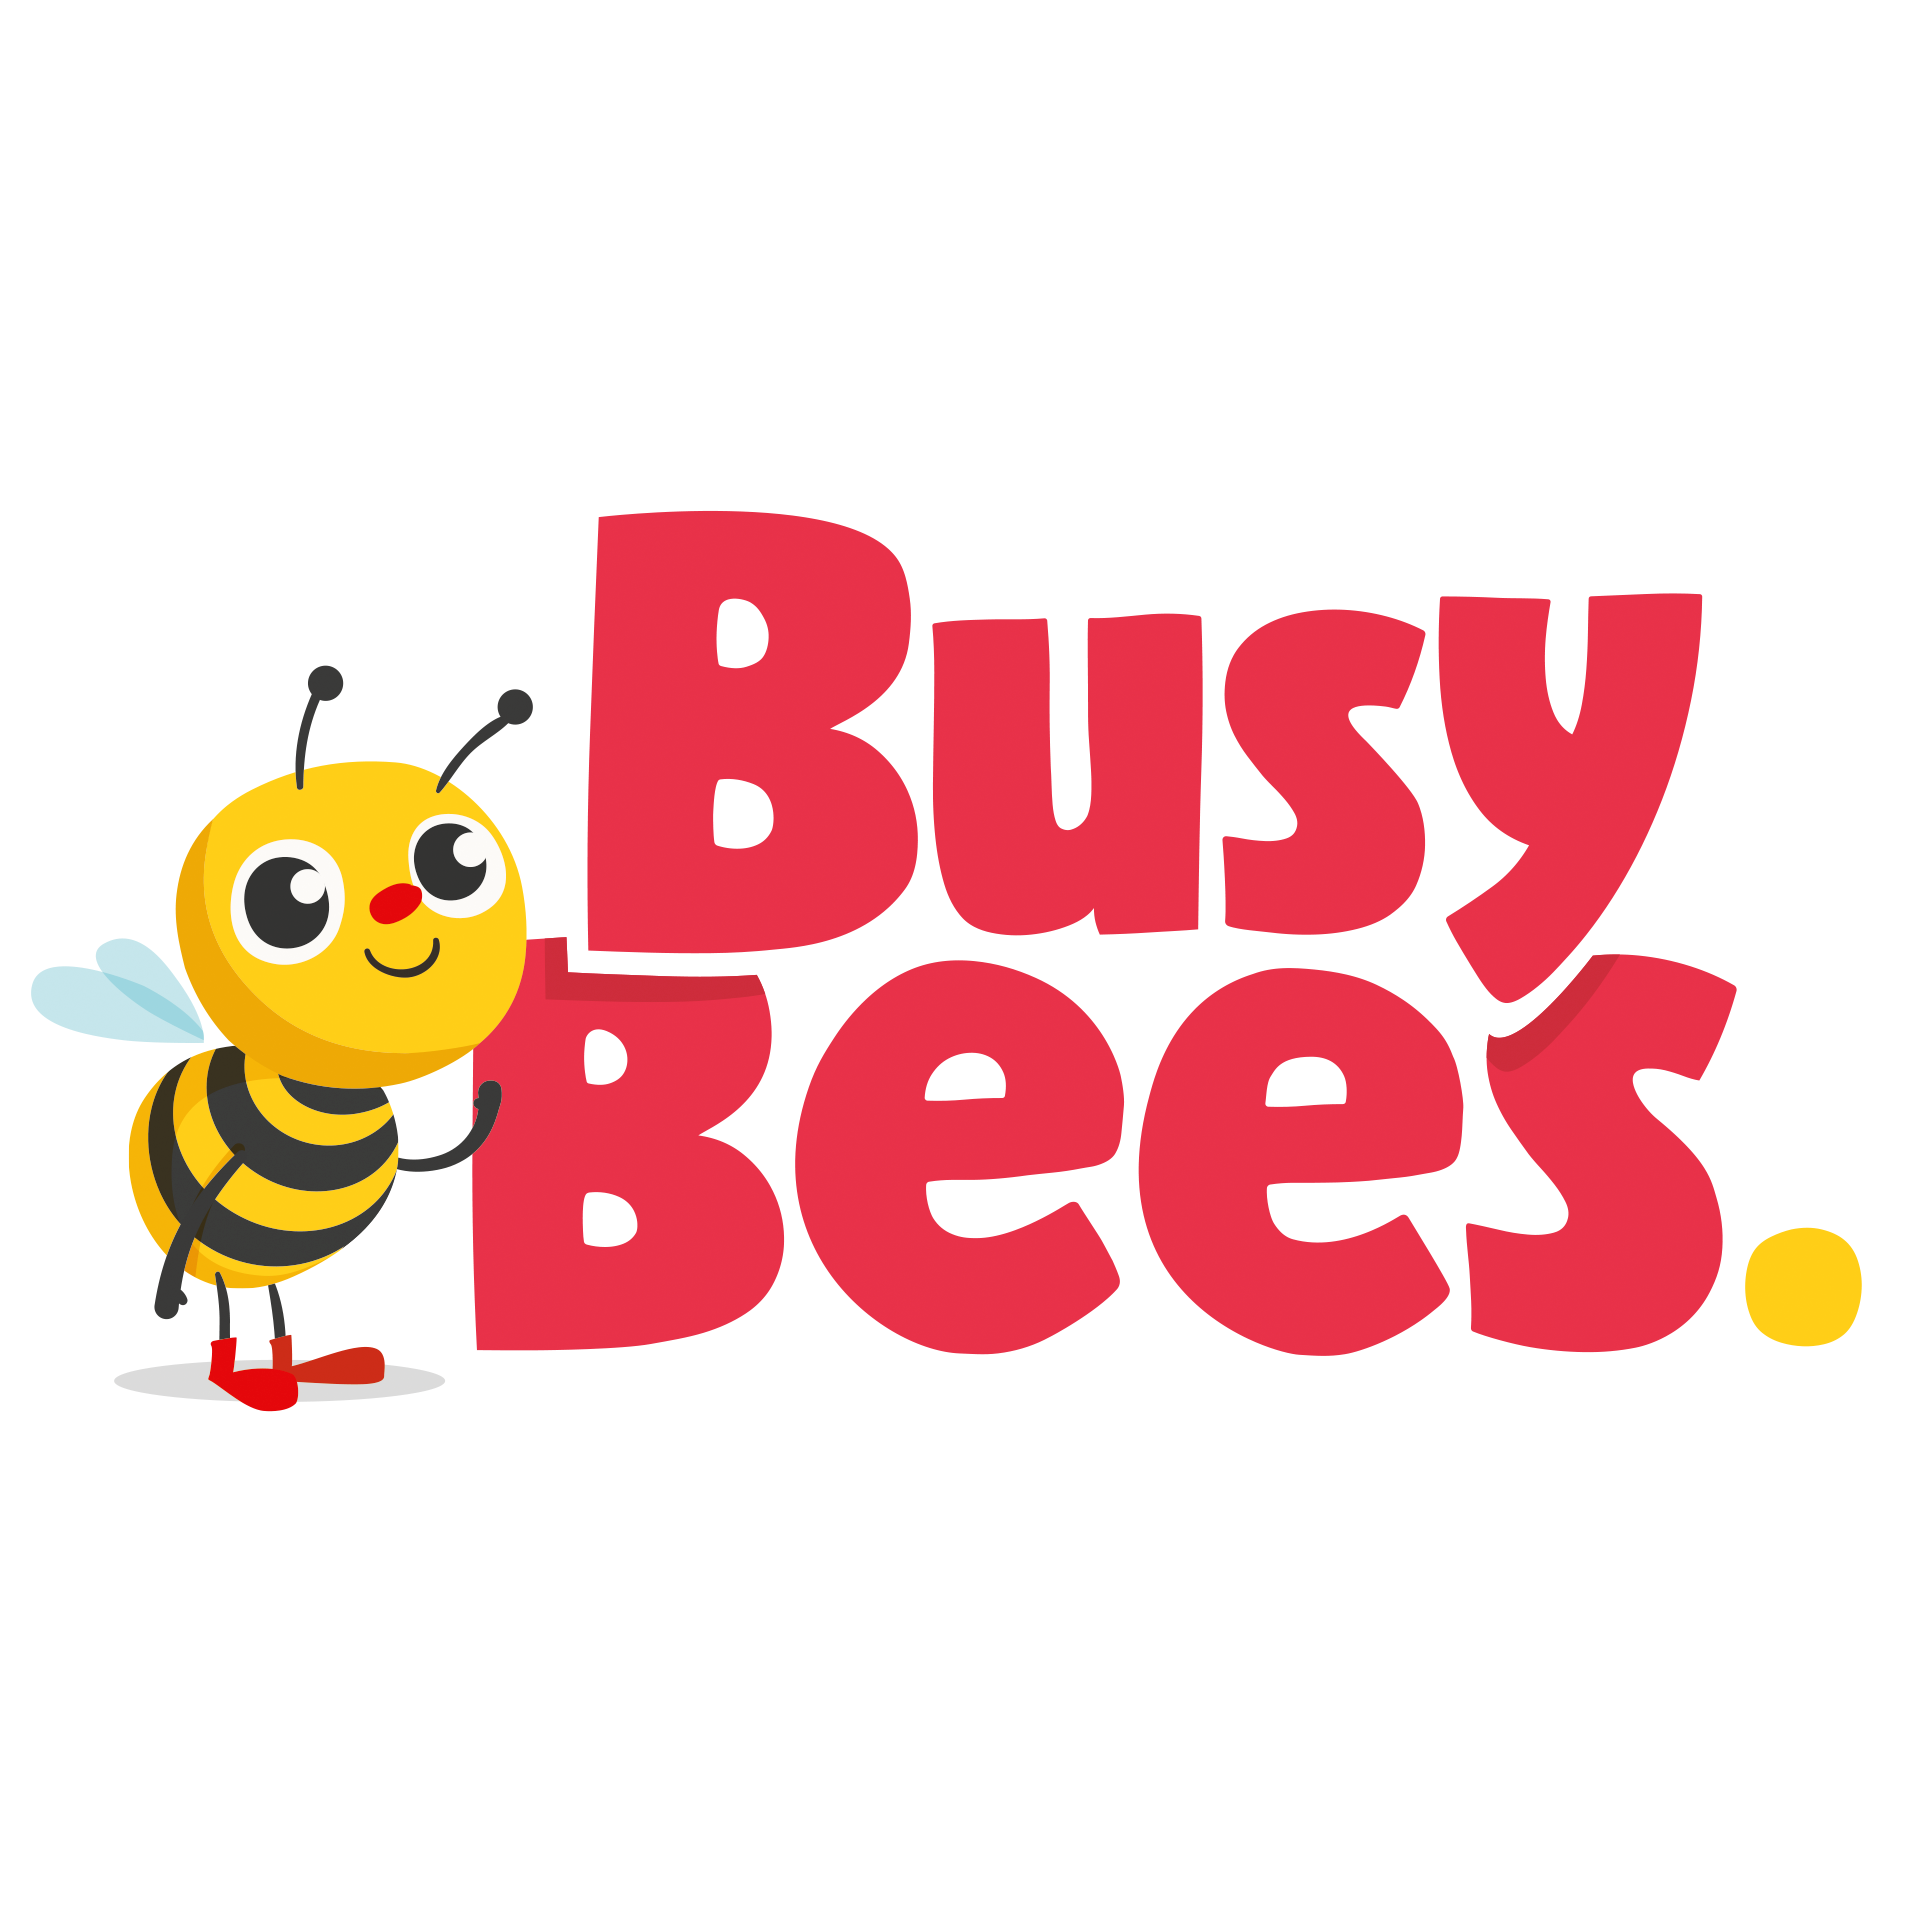 Busy Bees Busy Bees Andover Andover 01264 771155